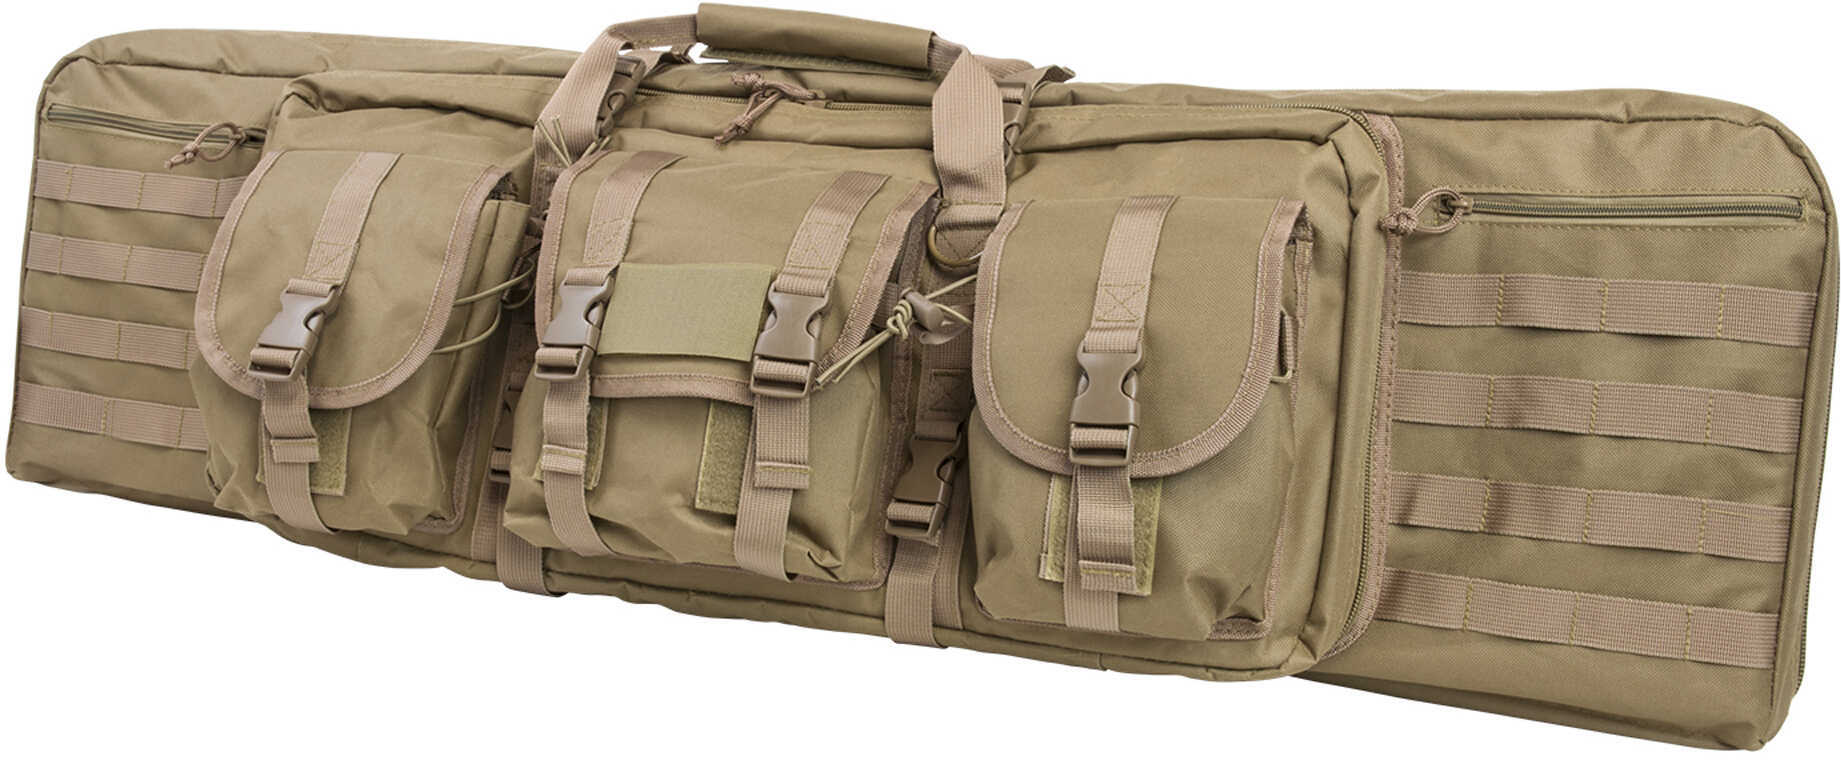 NCSTAR Double Carbine Case 42" Rifle Nylon Tan Exterior PALS Webbing Interior Padded with Thick Foam Accommodates